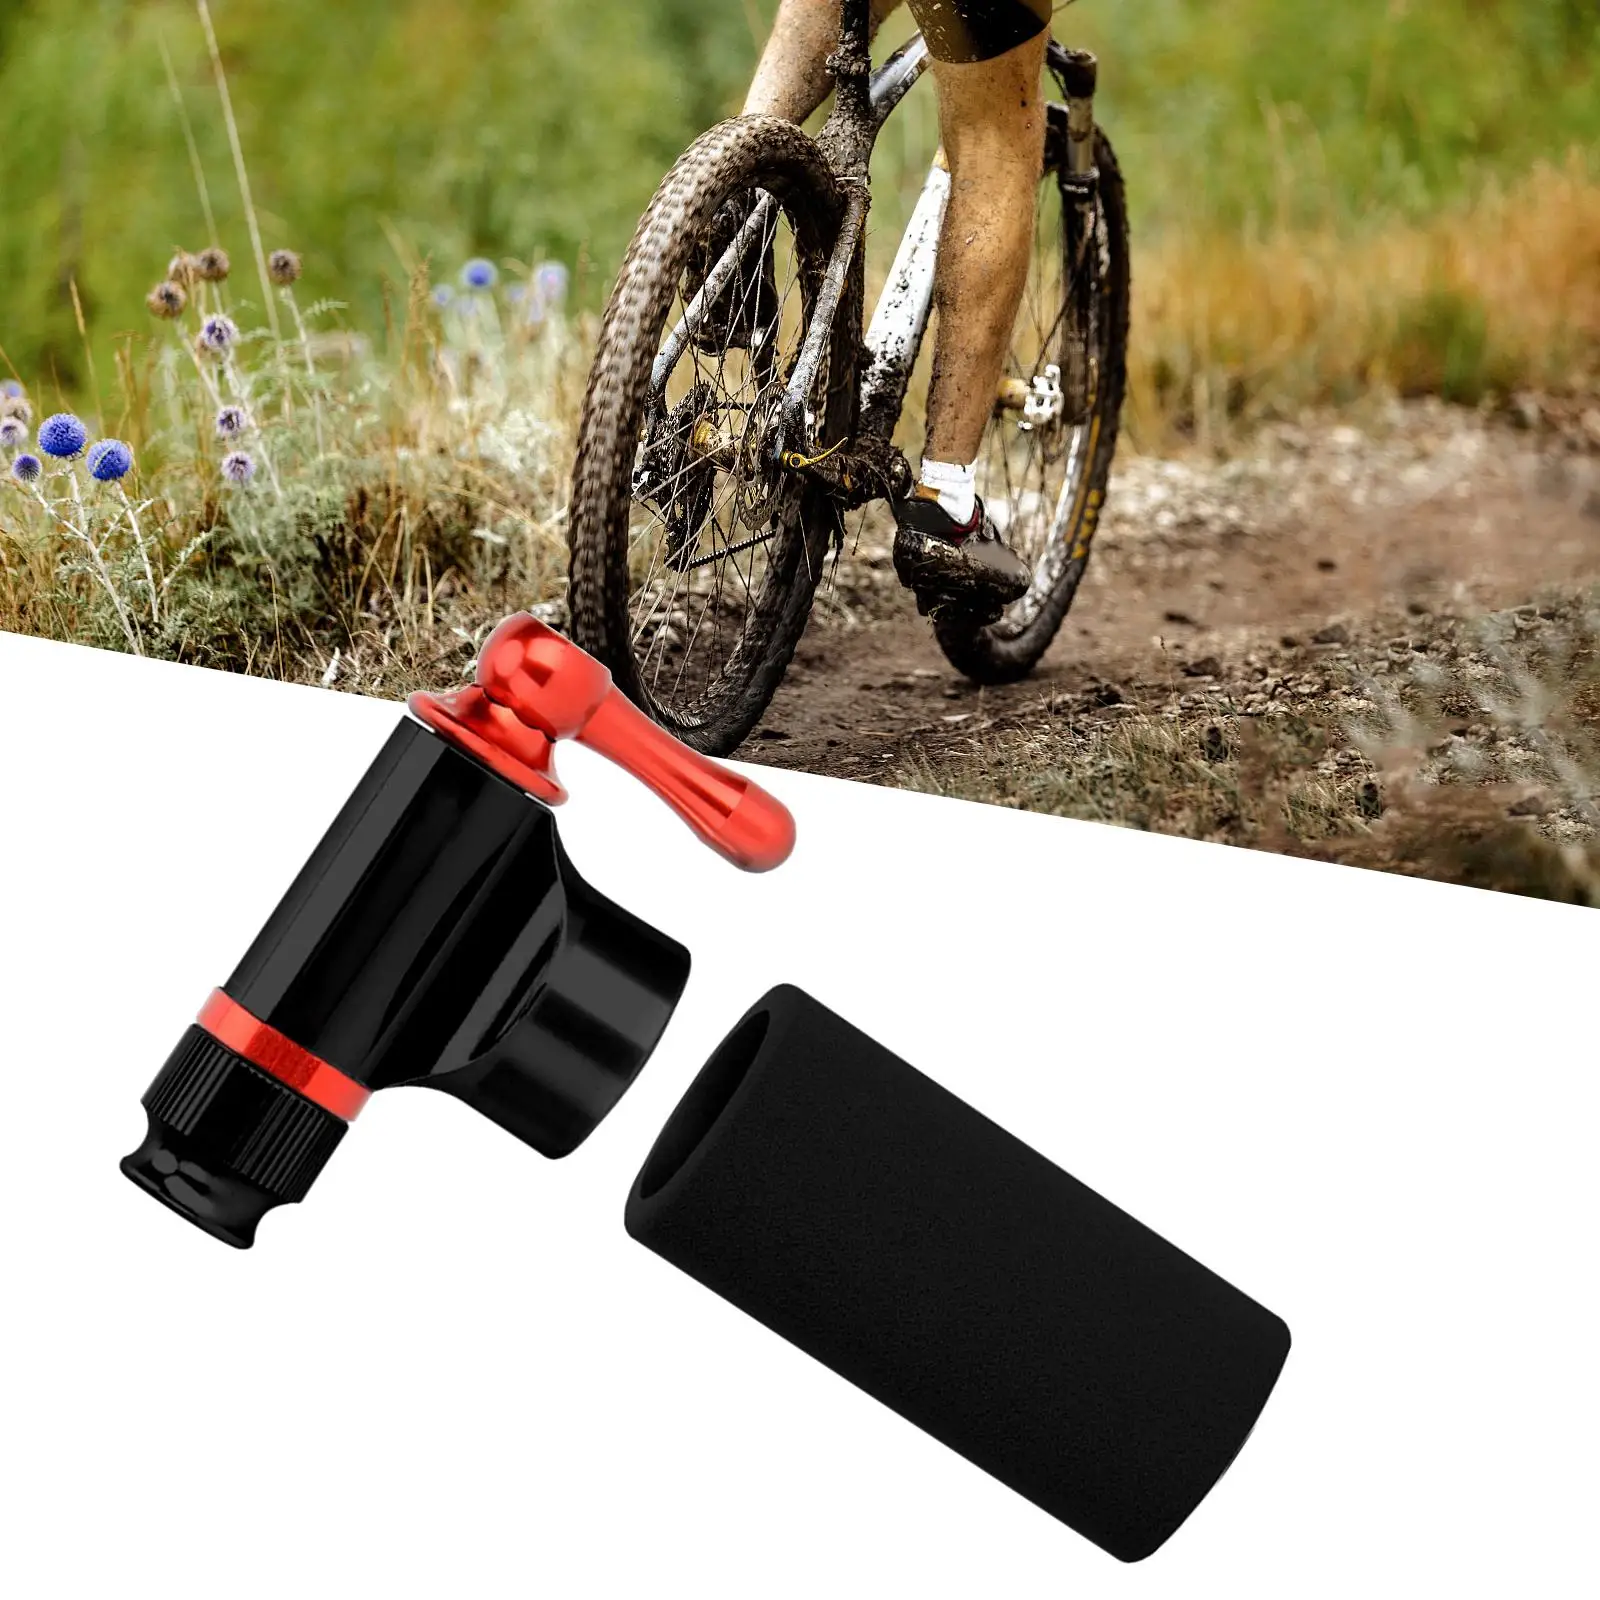 CO2 Bike Tire Inflator Portable Portable Inflator Connector for Ball Sports